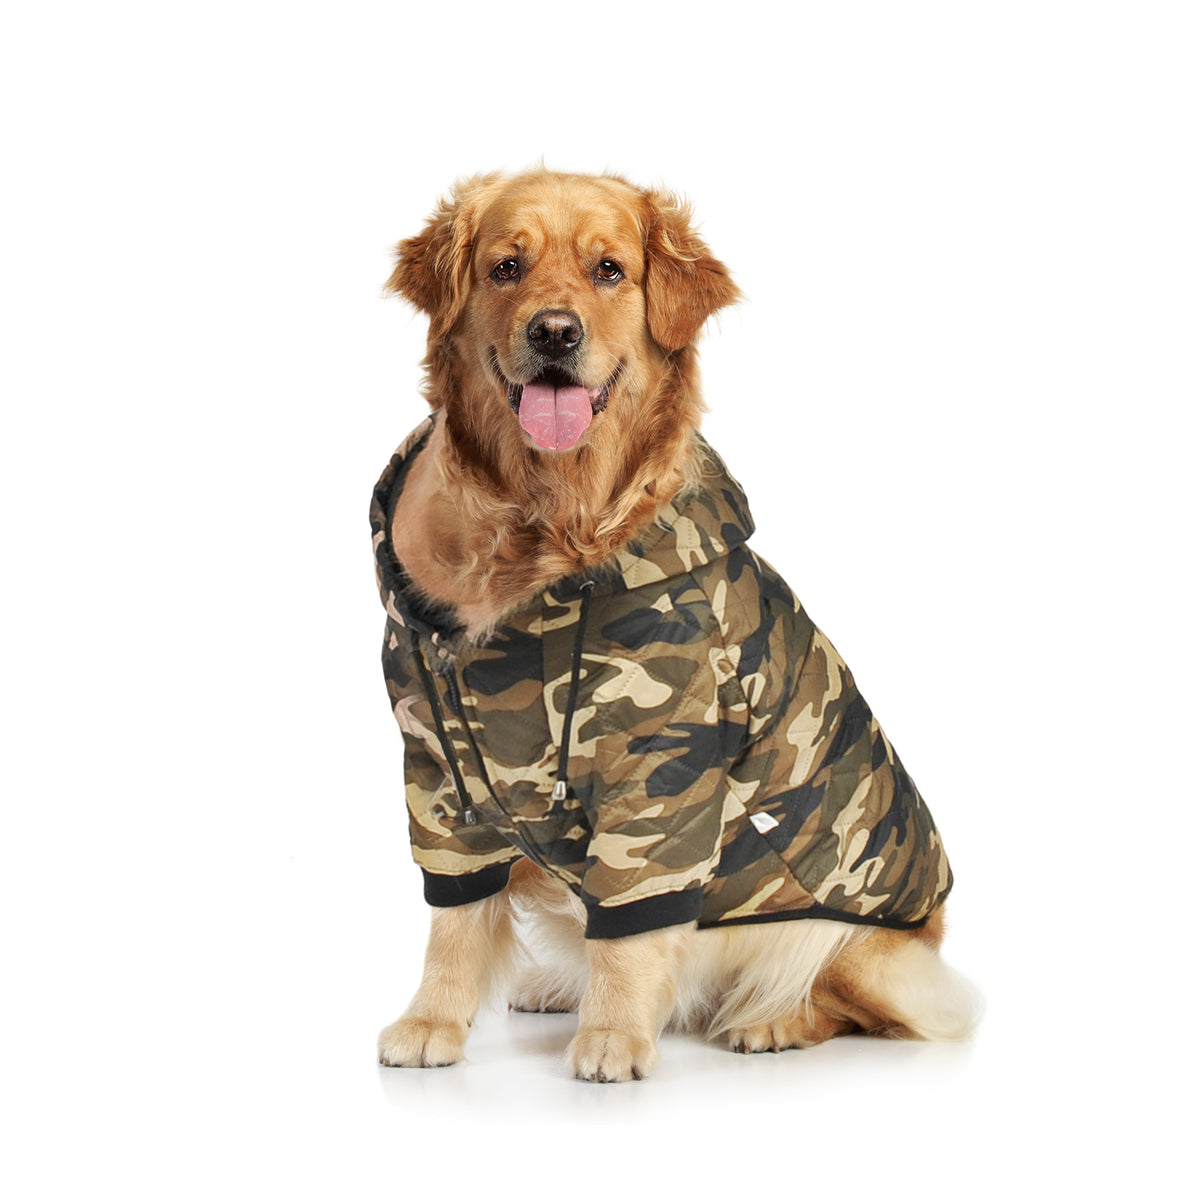 Innopet Dog Hoodies for Large Dogs, Camo Style Raincoat Hoodie Jacket, Deluxe Polyester Material With Two layers, Perfect for Cold Season Outdoor Wear, Best for Hiking and Camping